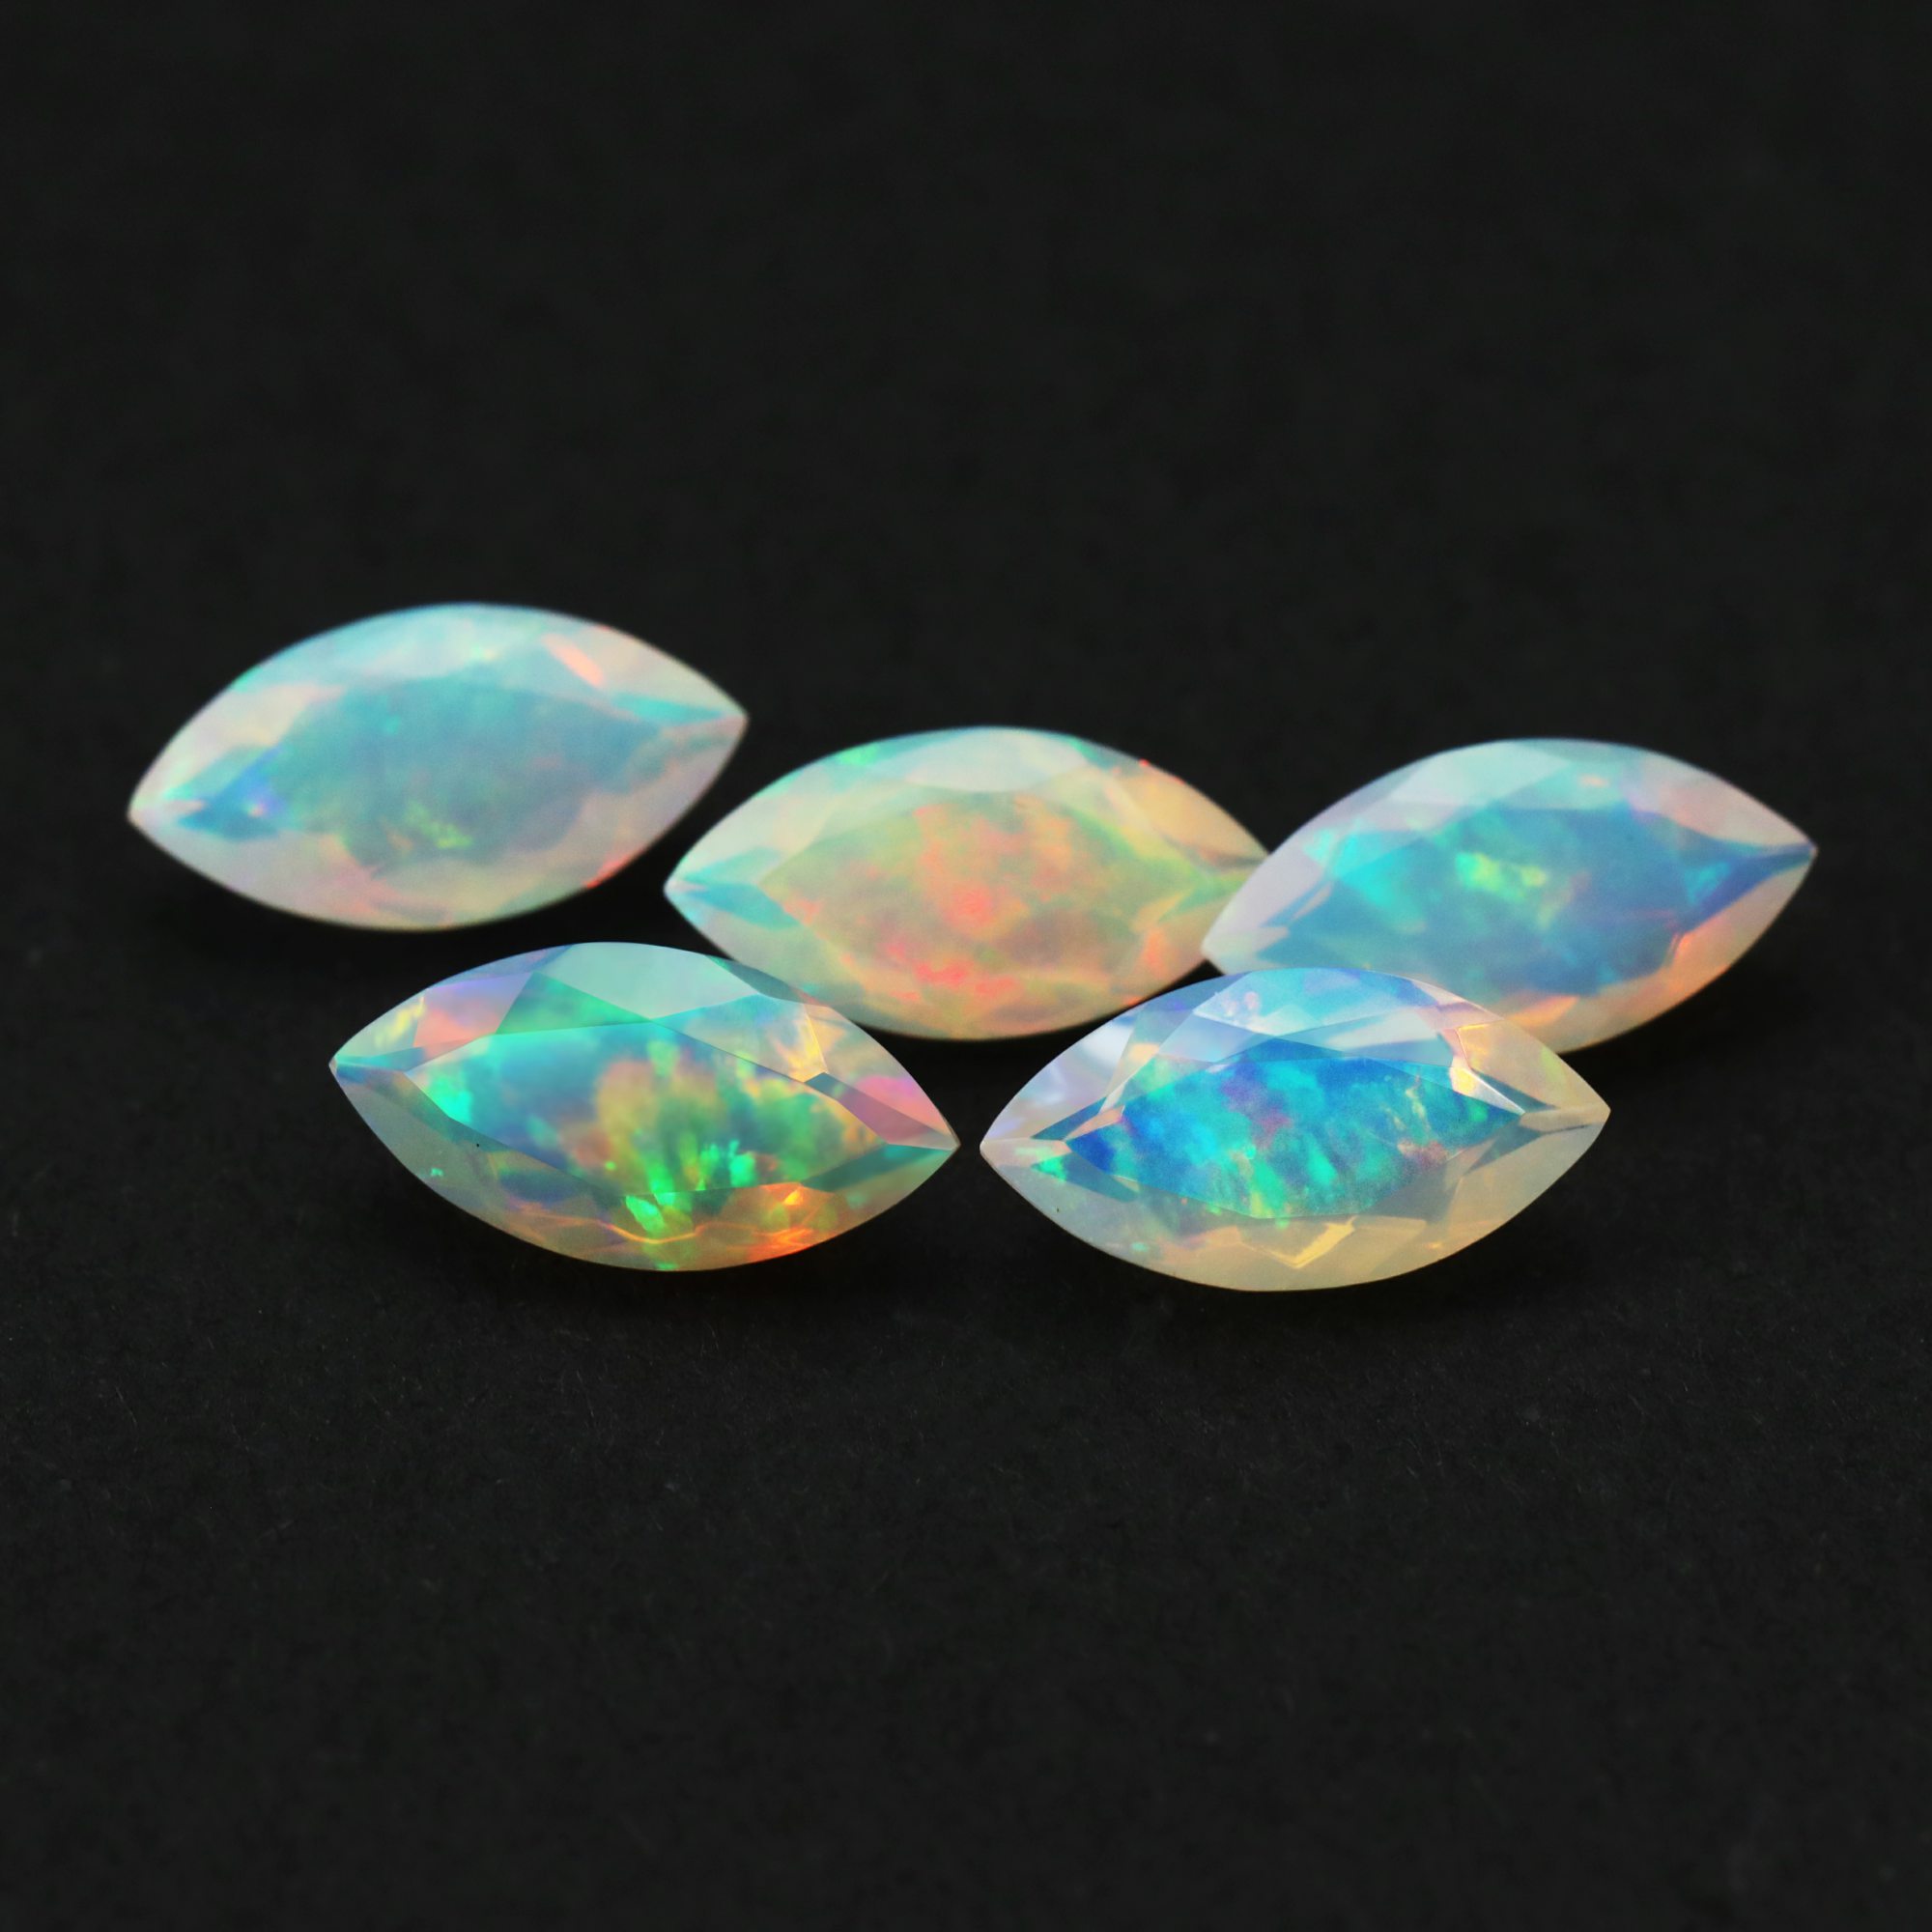 1Pcs 5x10MM Marquise Cut Natural Africa Opal October Birthstone Faceted Gemstone Mood Color Change Stone DIY Jewelry Supplies 4160036 - Click Image to Close